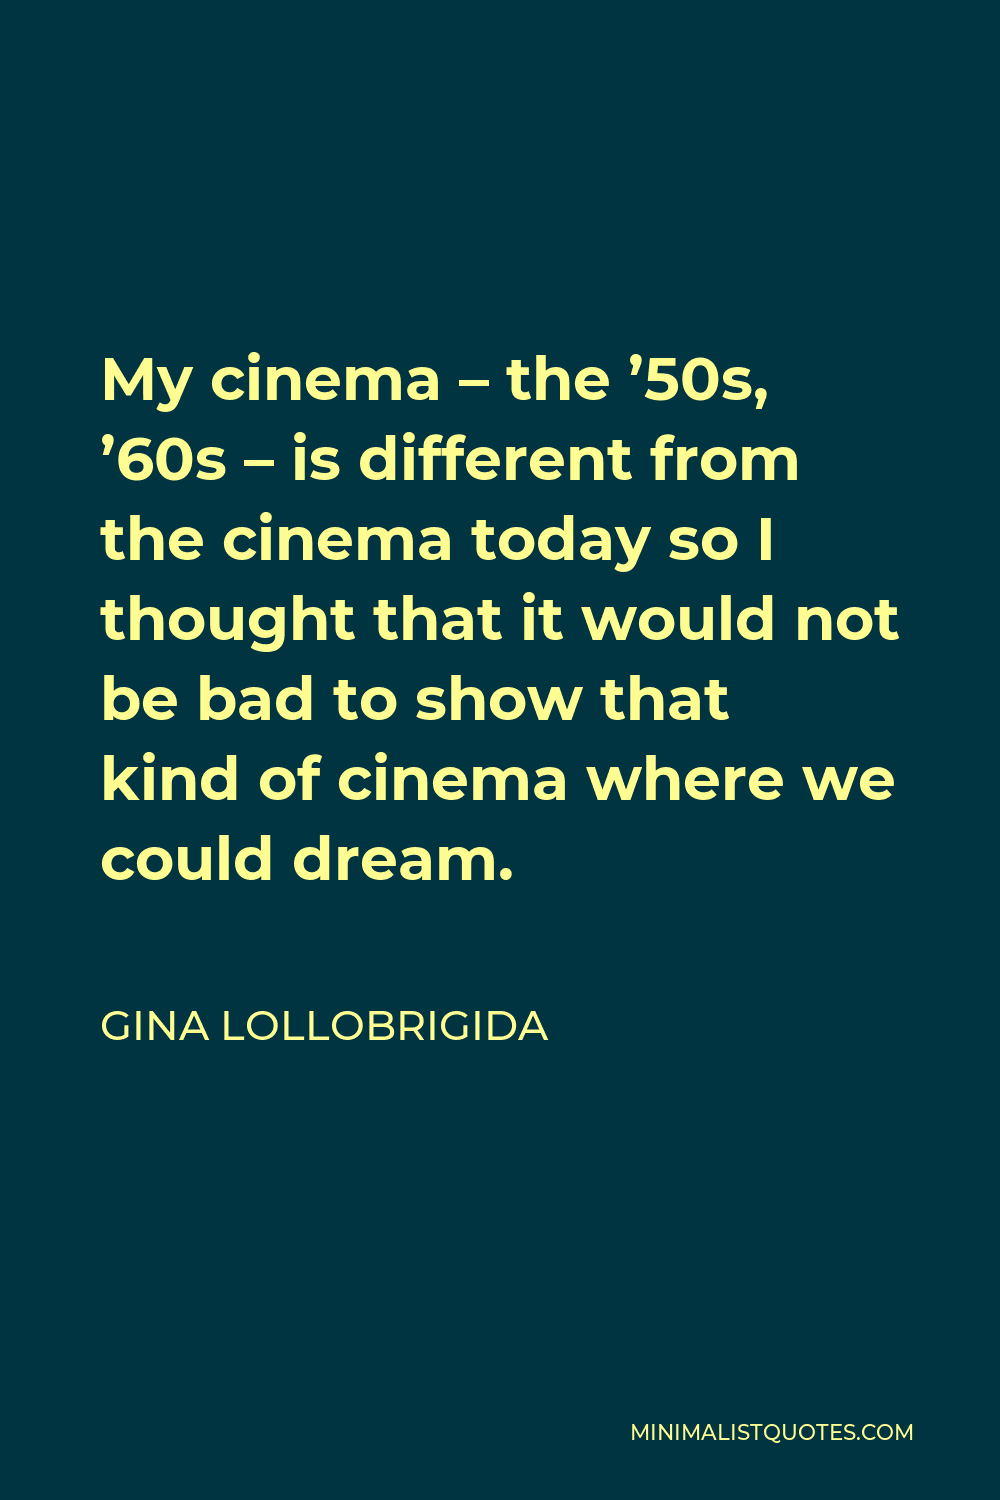 Gina Lollobrigida Quote - My cinema – the ’50s, ’60s – is different from the cinema today so I thought that it would not be bad to show that kind of cinema where we could dream.